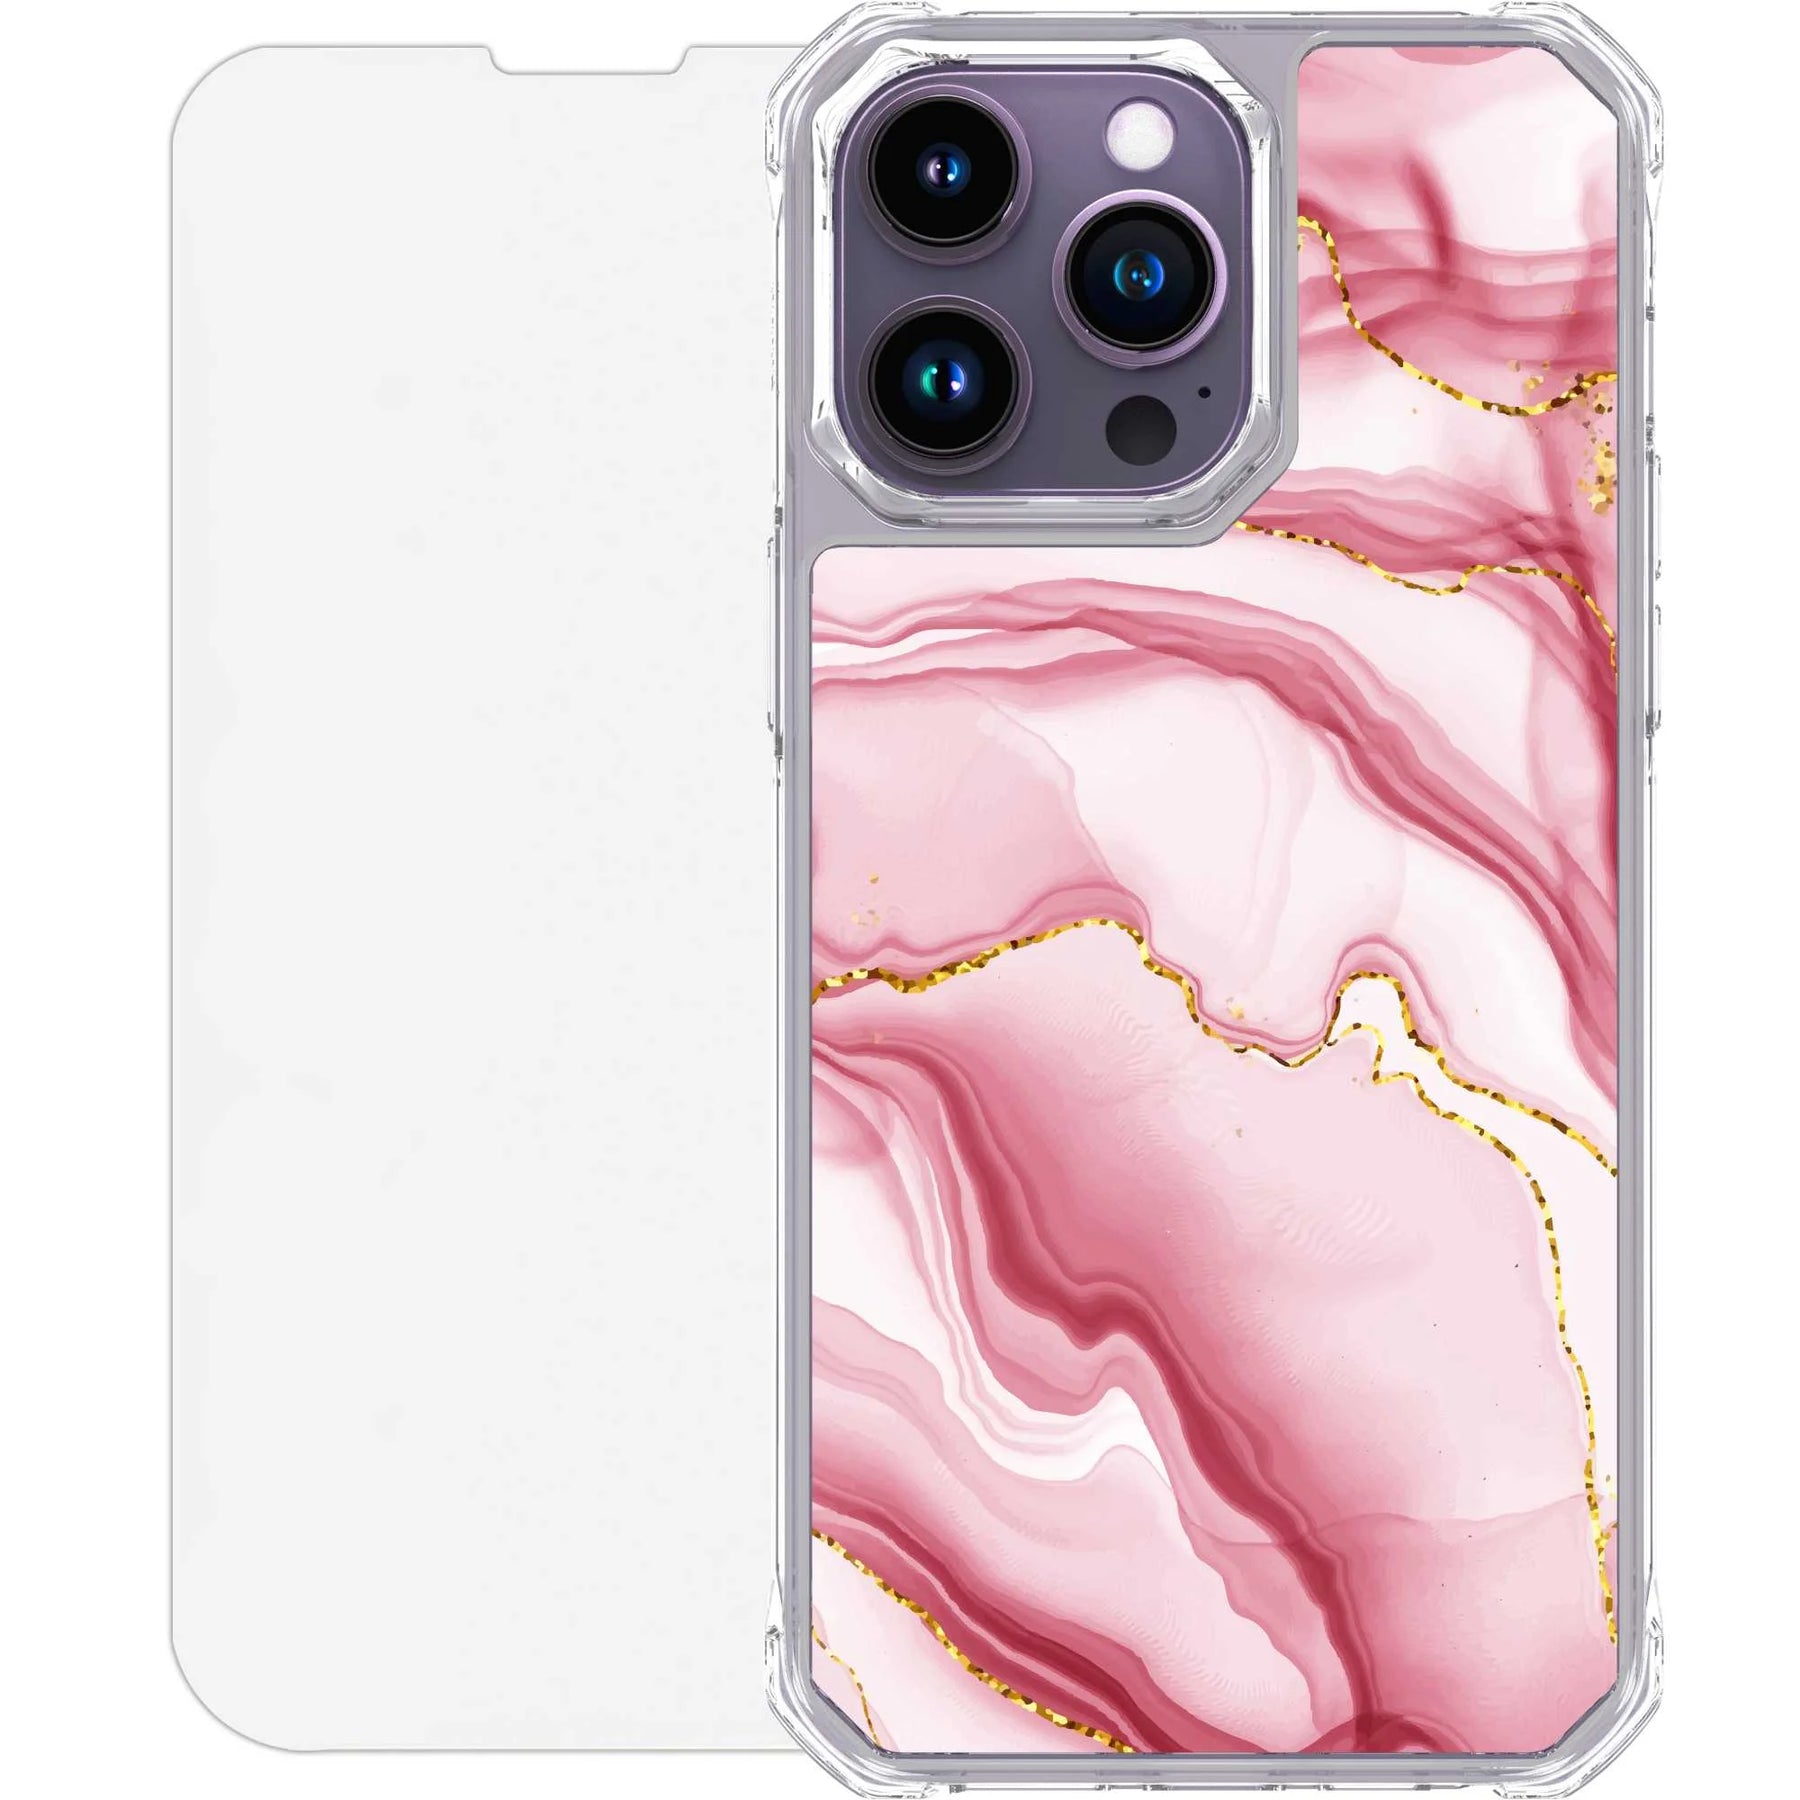 CrystalCase for iPhone 14 Pro Max